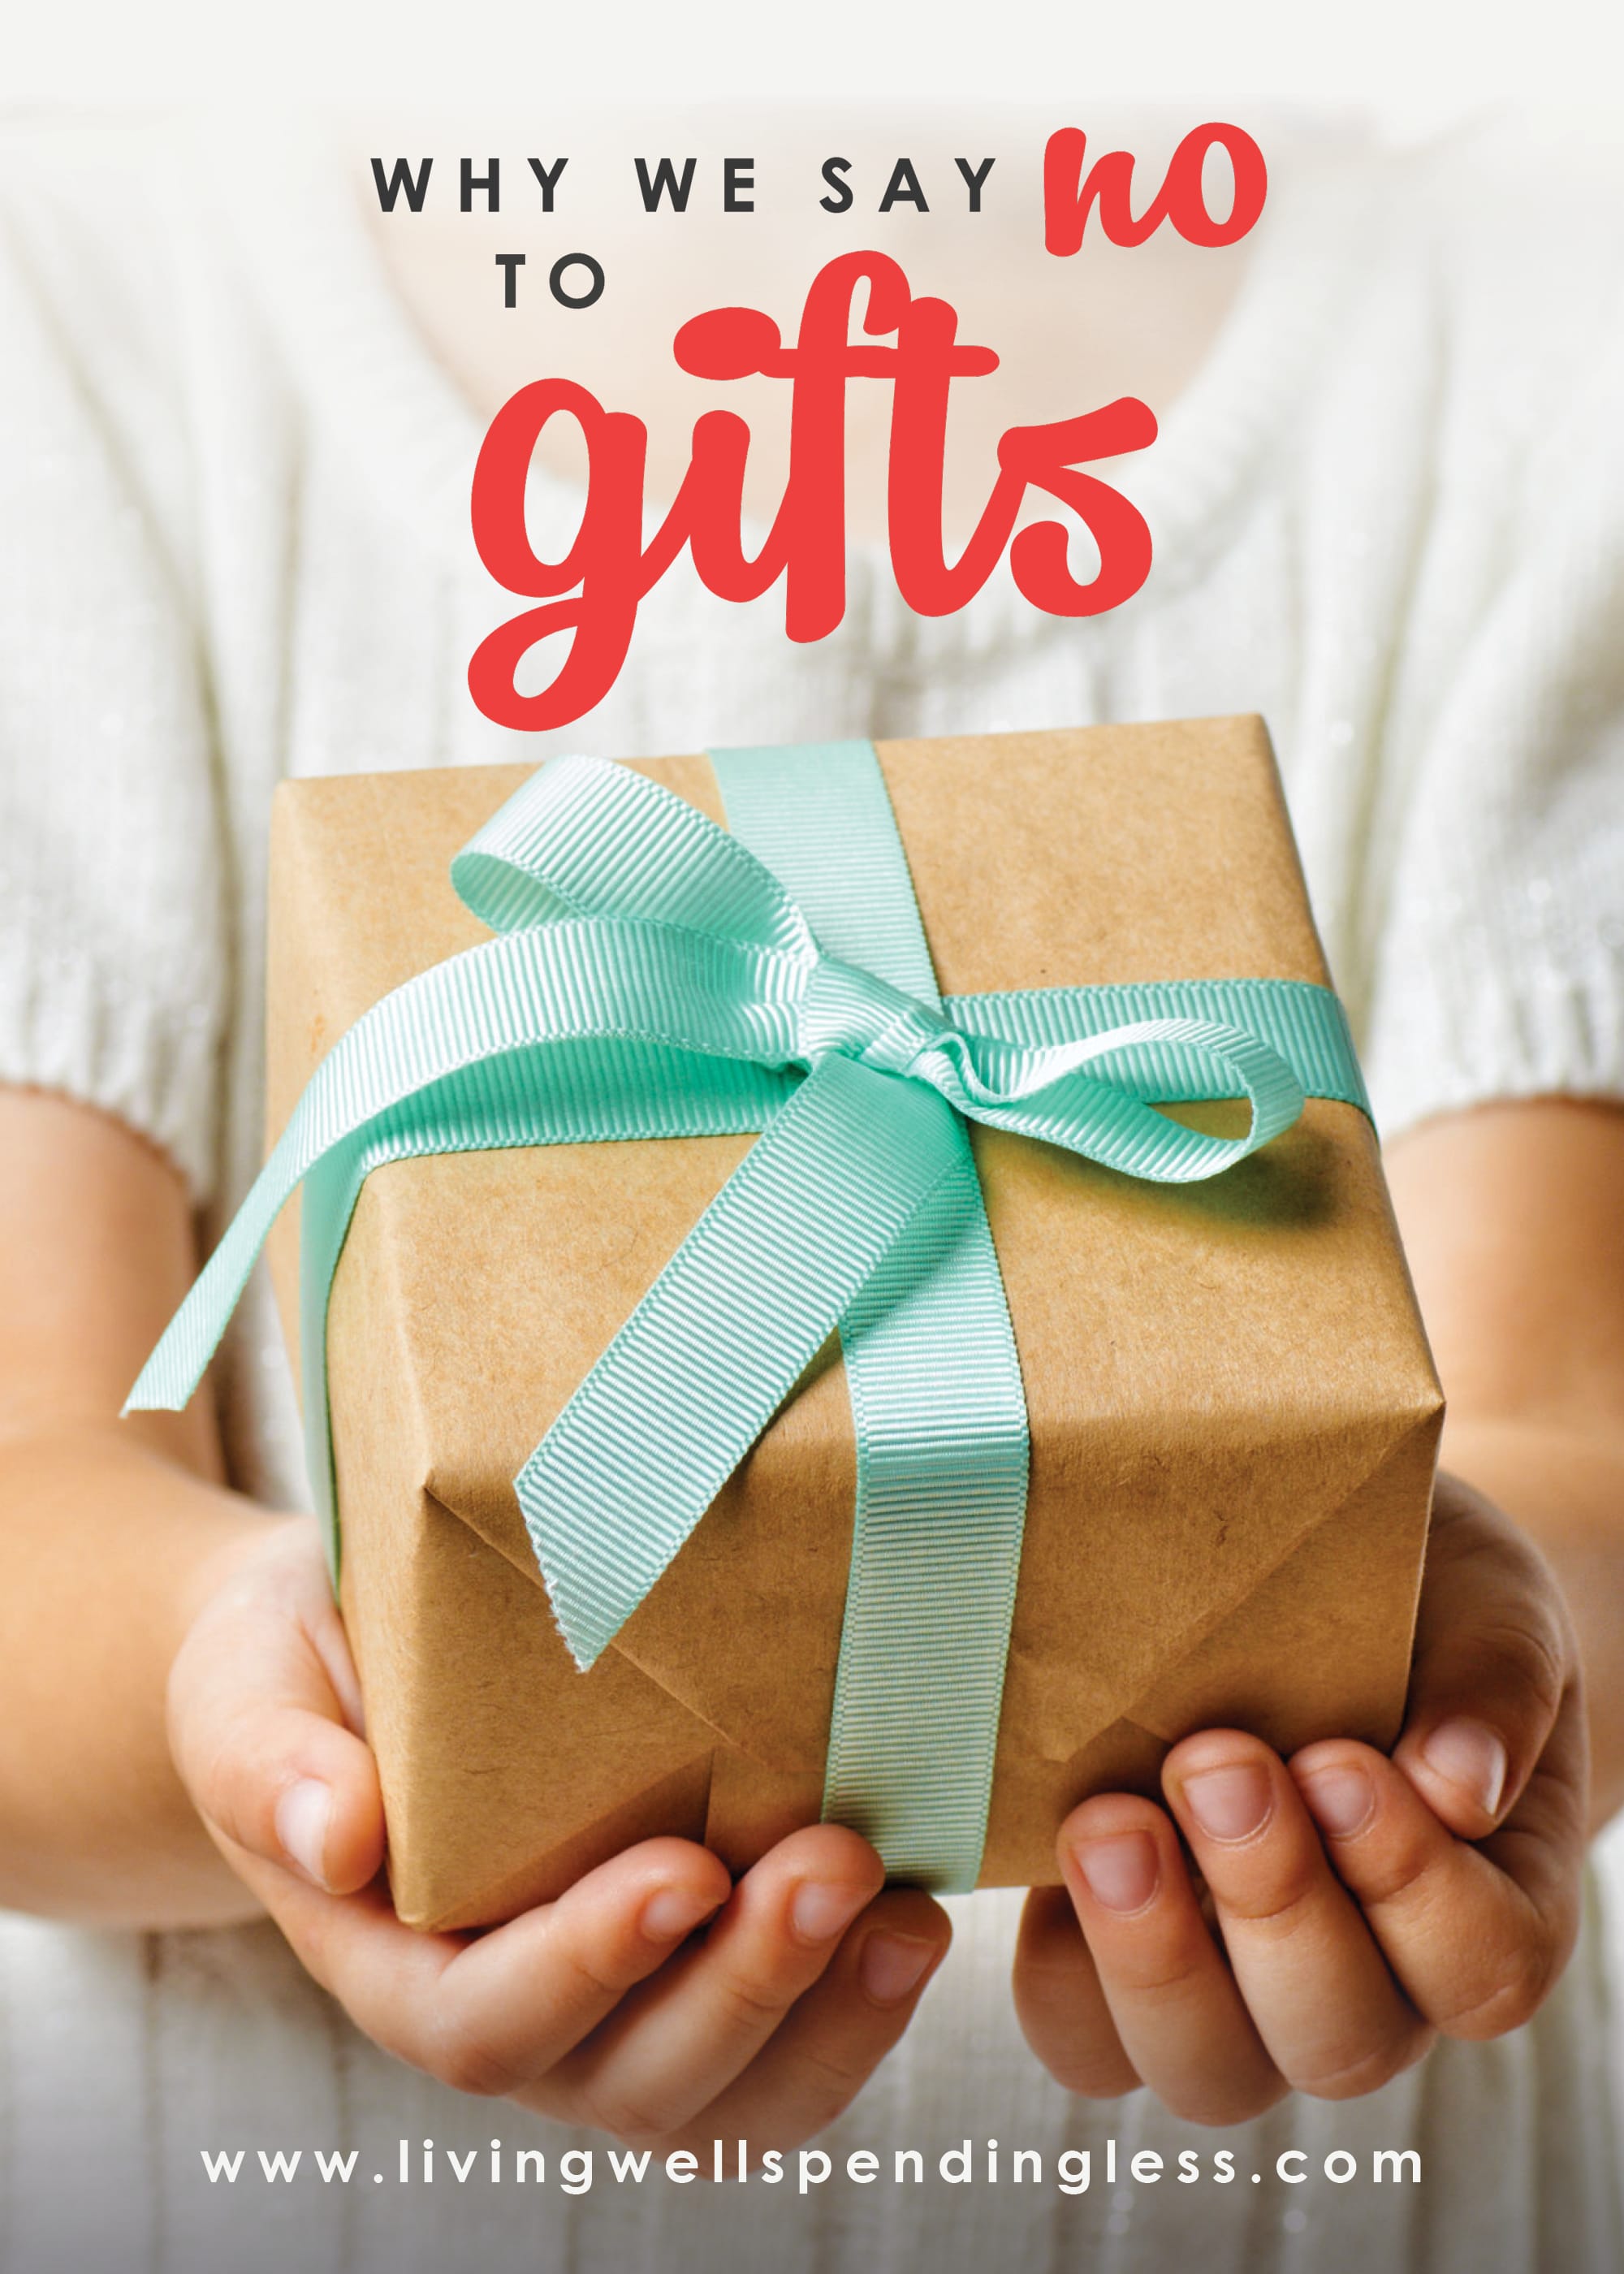 Let's face it--when it comes to kids, the STUFF just keeps on coming! If you are feeling overwhelmed by the ever-growing pile, it might be time to take drastic action. Not sure you have it in you? Here's why we say no to gifts--read it and decide for yourself!